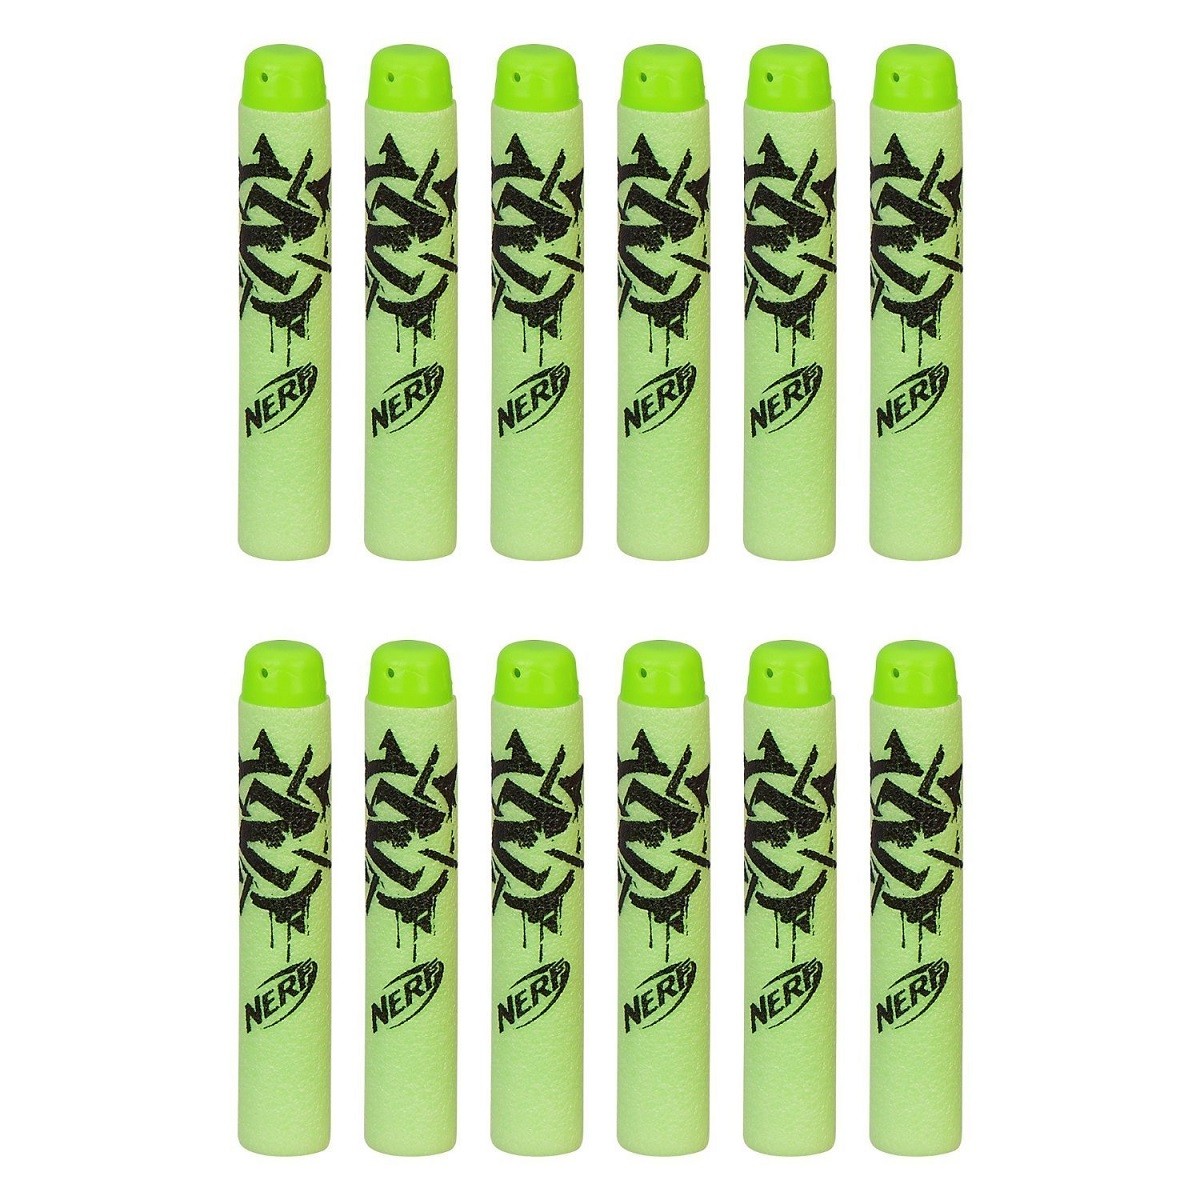 na-fzombi Strike addition darts (1 2 ps ) pack Nerf Zombie Strike Dart Refill Pack B3861 parallel imported goods mail service free shipping 